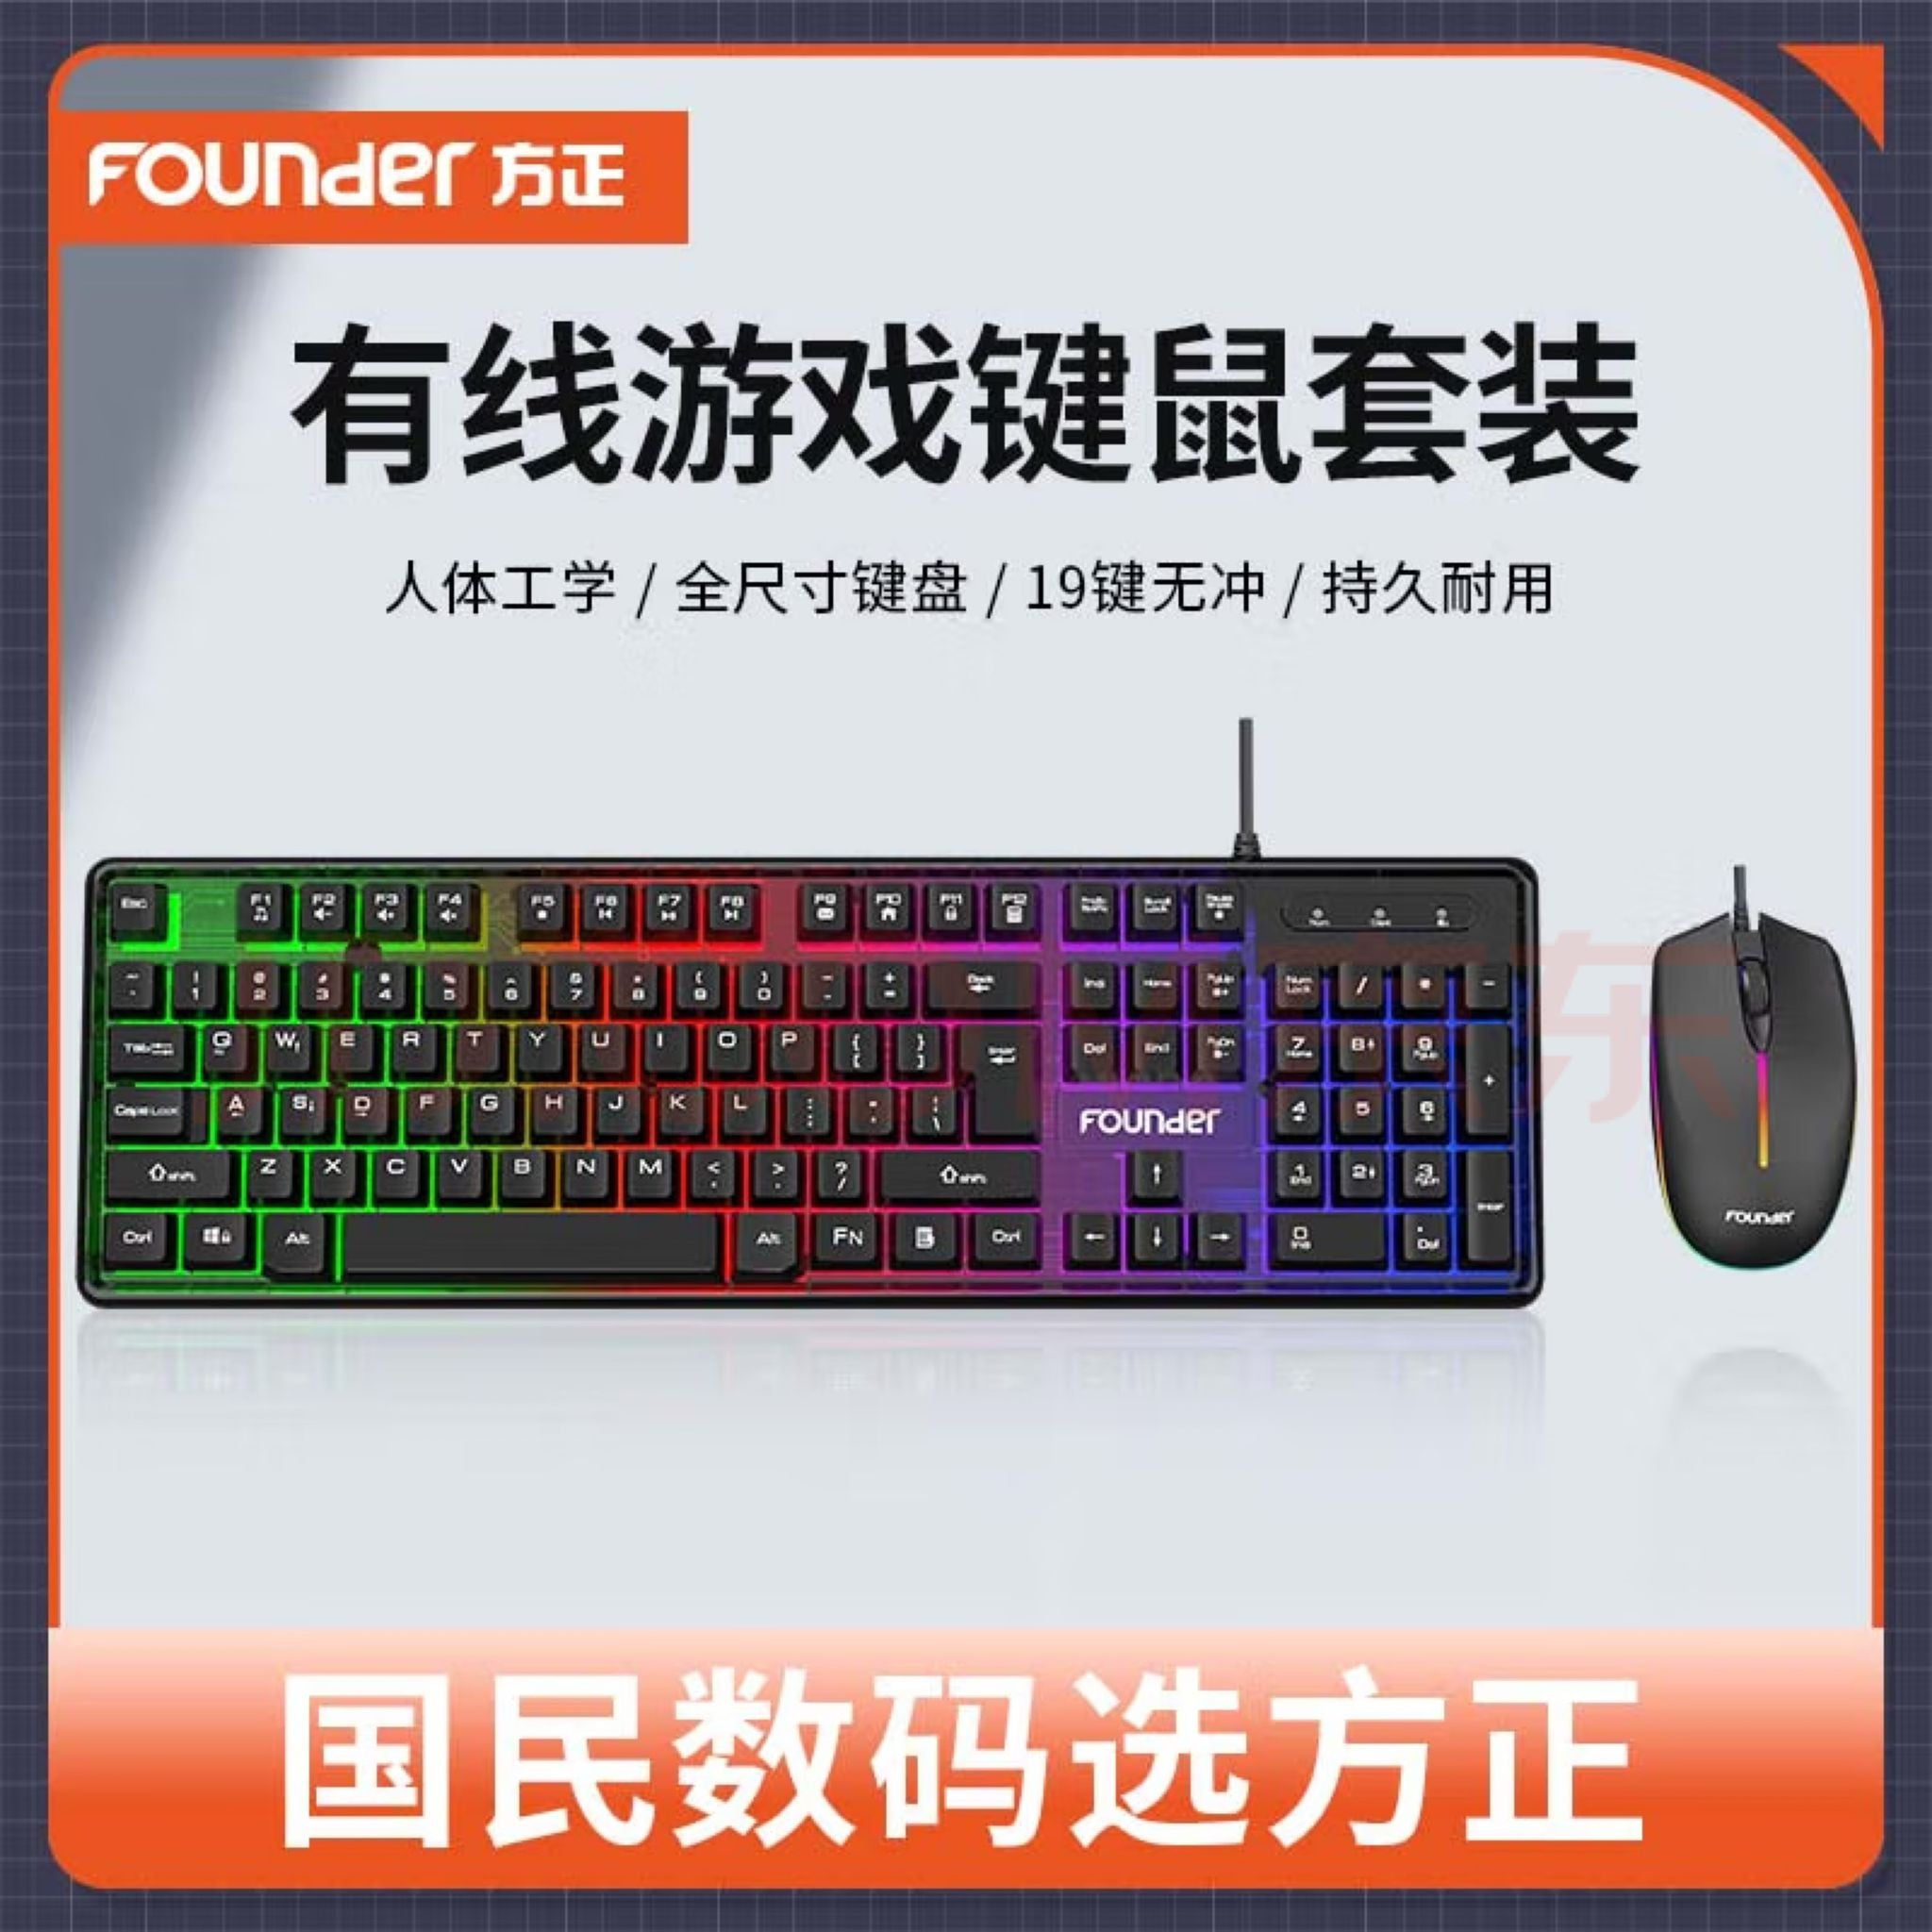 O2W SELECTION FOUNDER KG200 Wired Gaming Keyboard and Mouse Bundle